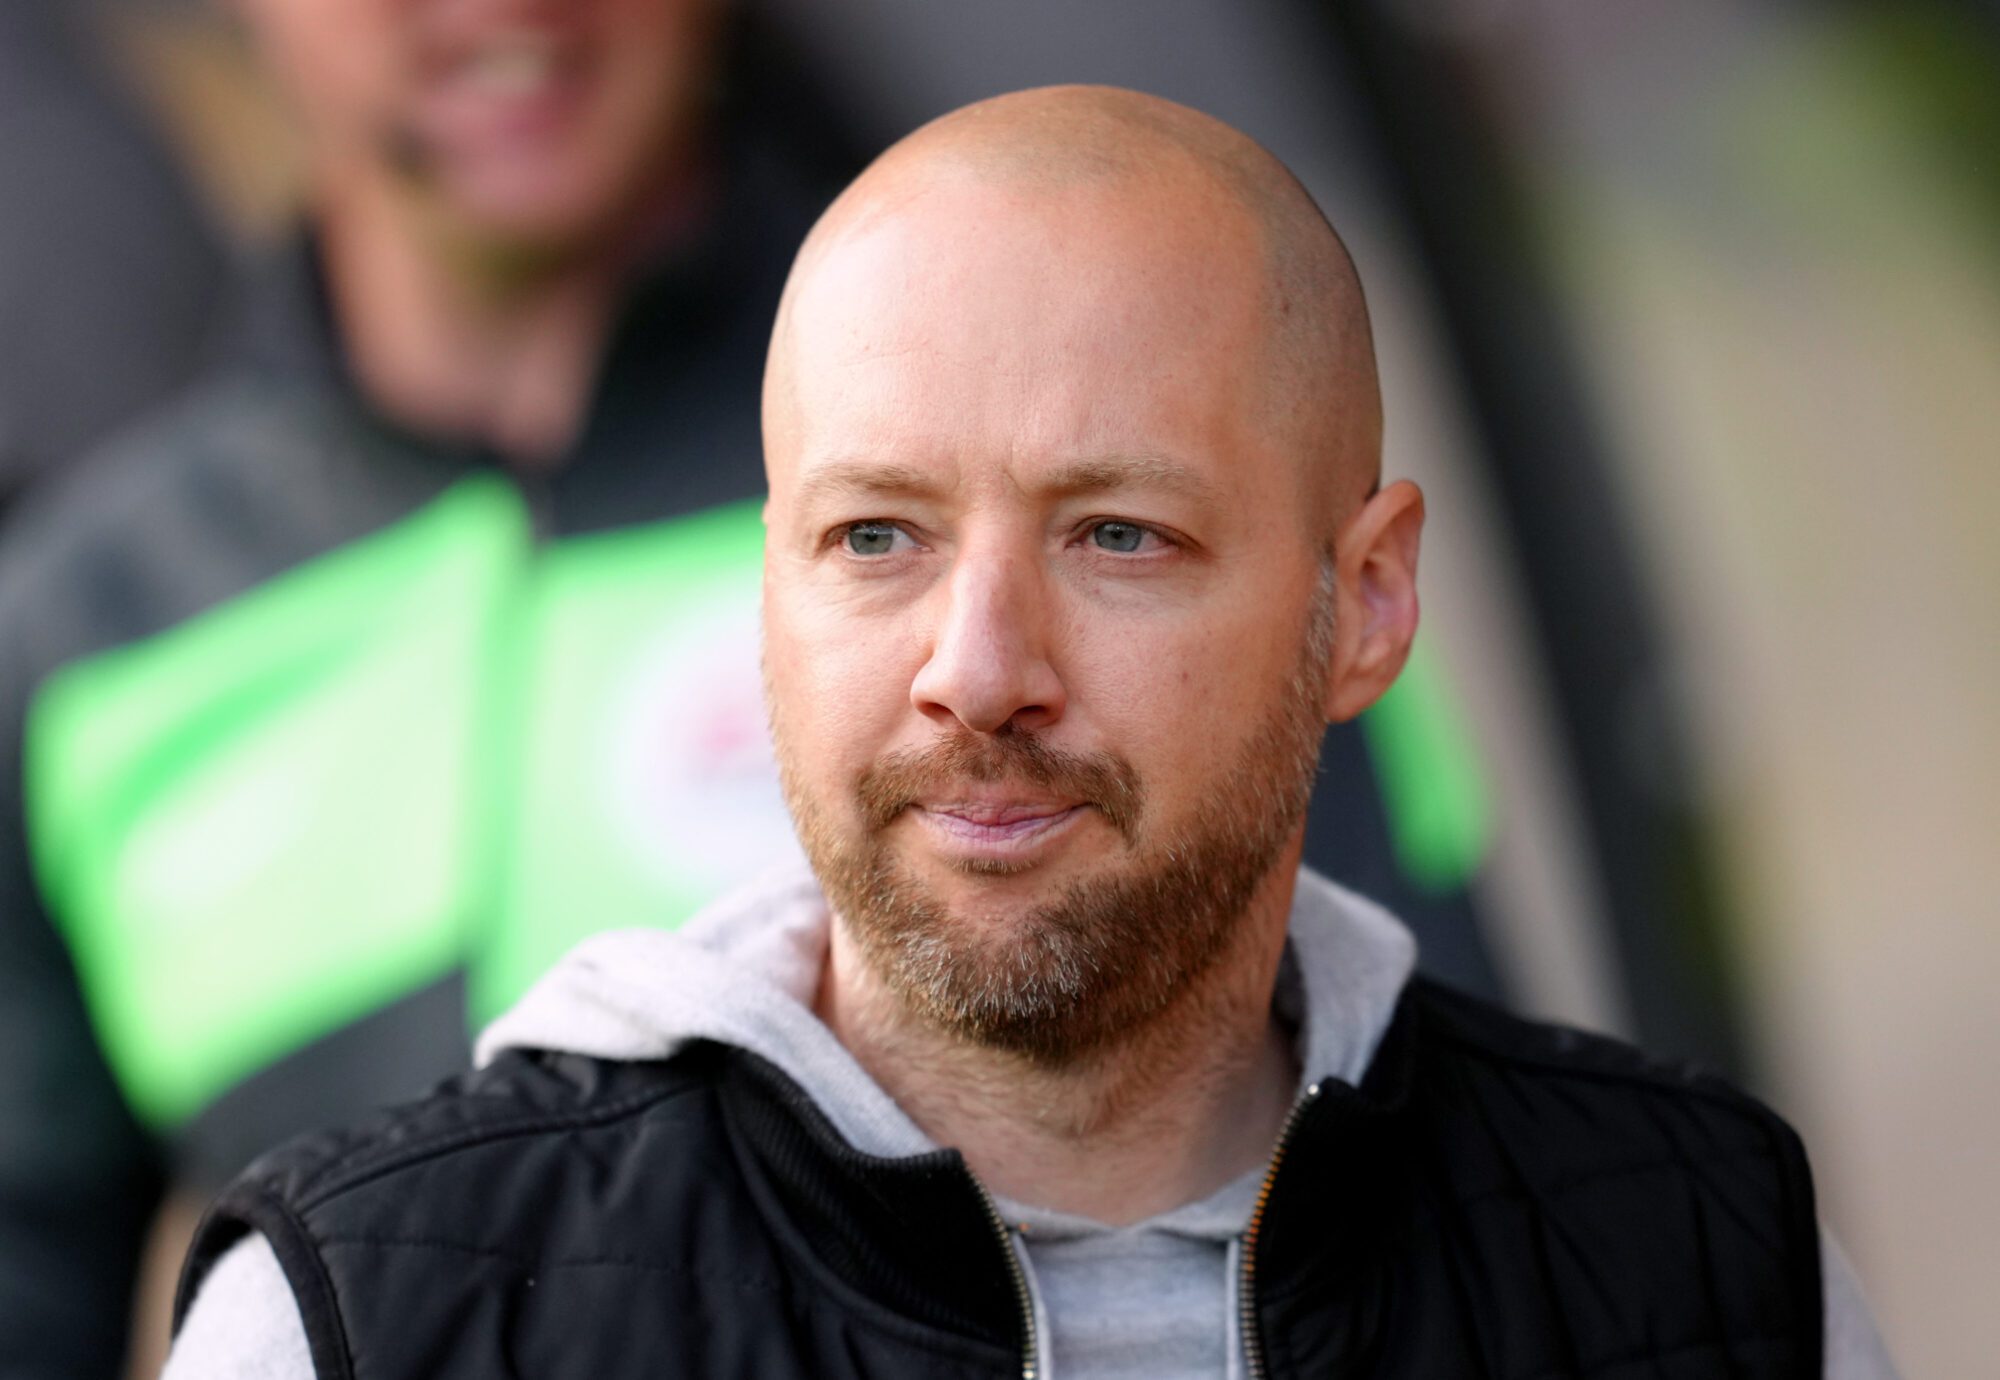 Charlton Athletic poised to appoint Swindon Town’s Ben Garner as new manager – South London News